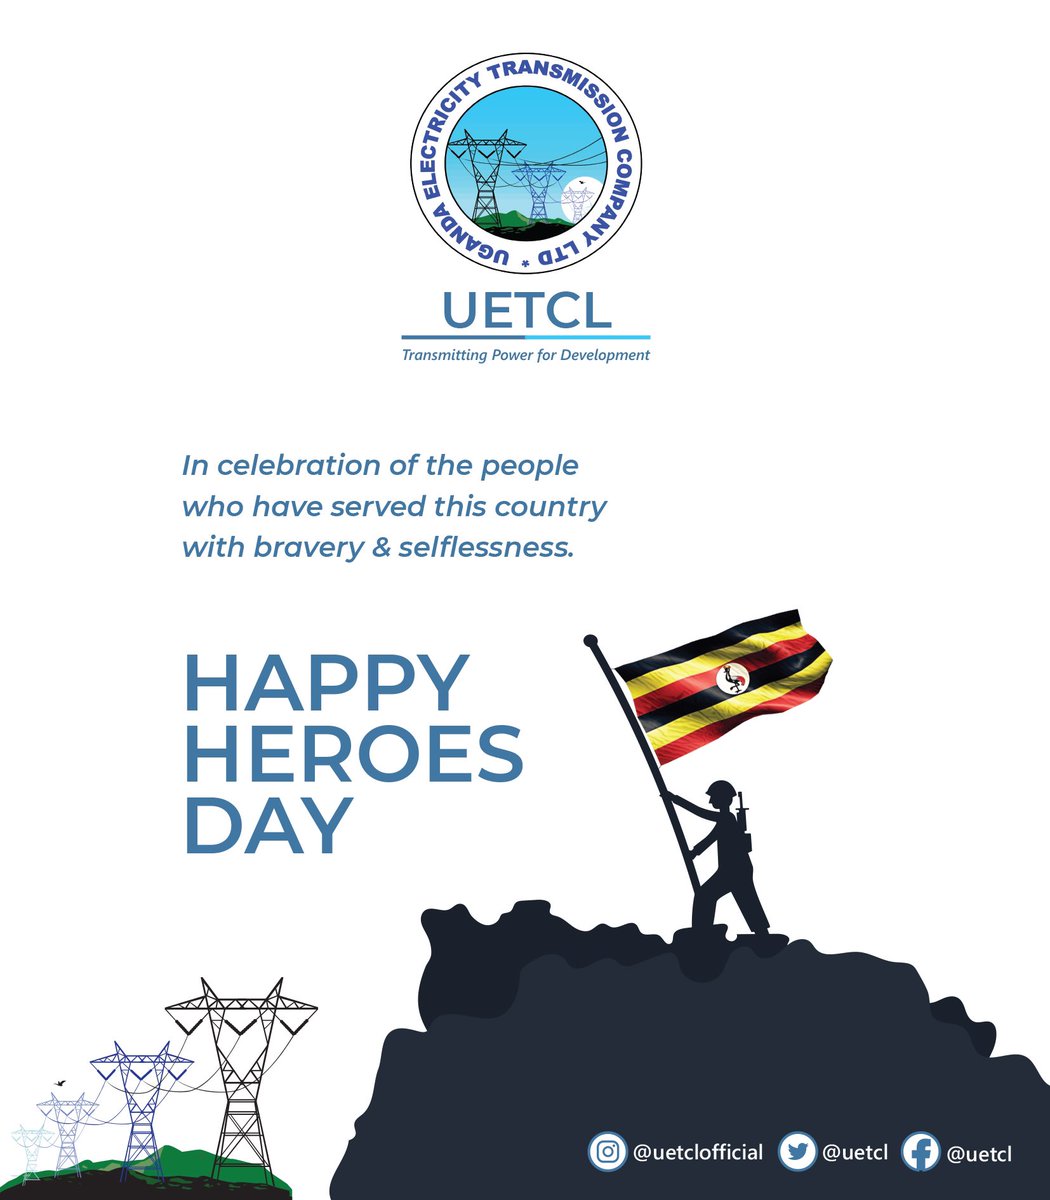 The Board, Management and Staff of UETCL wish you all a Happy Heroes Day